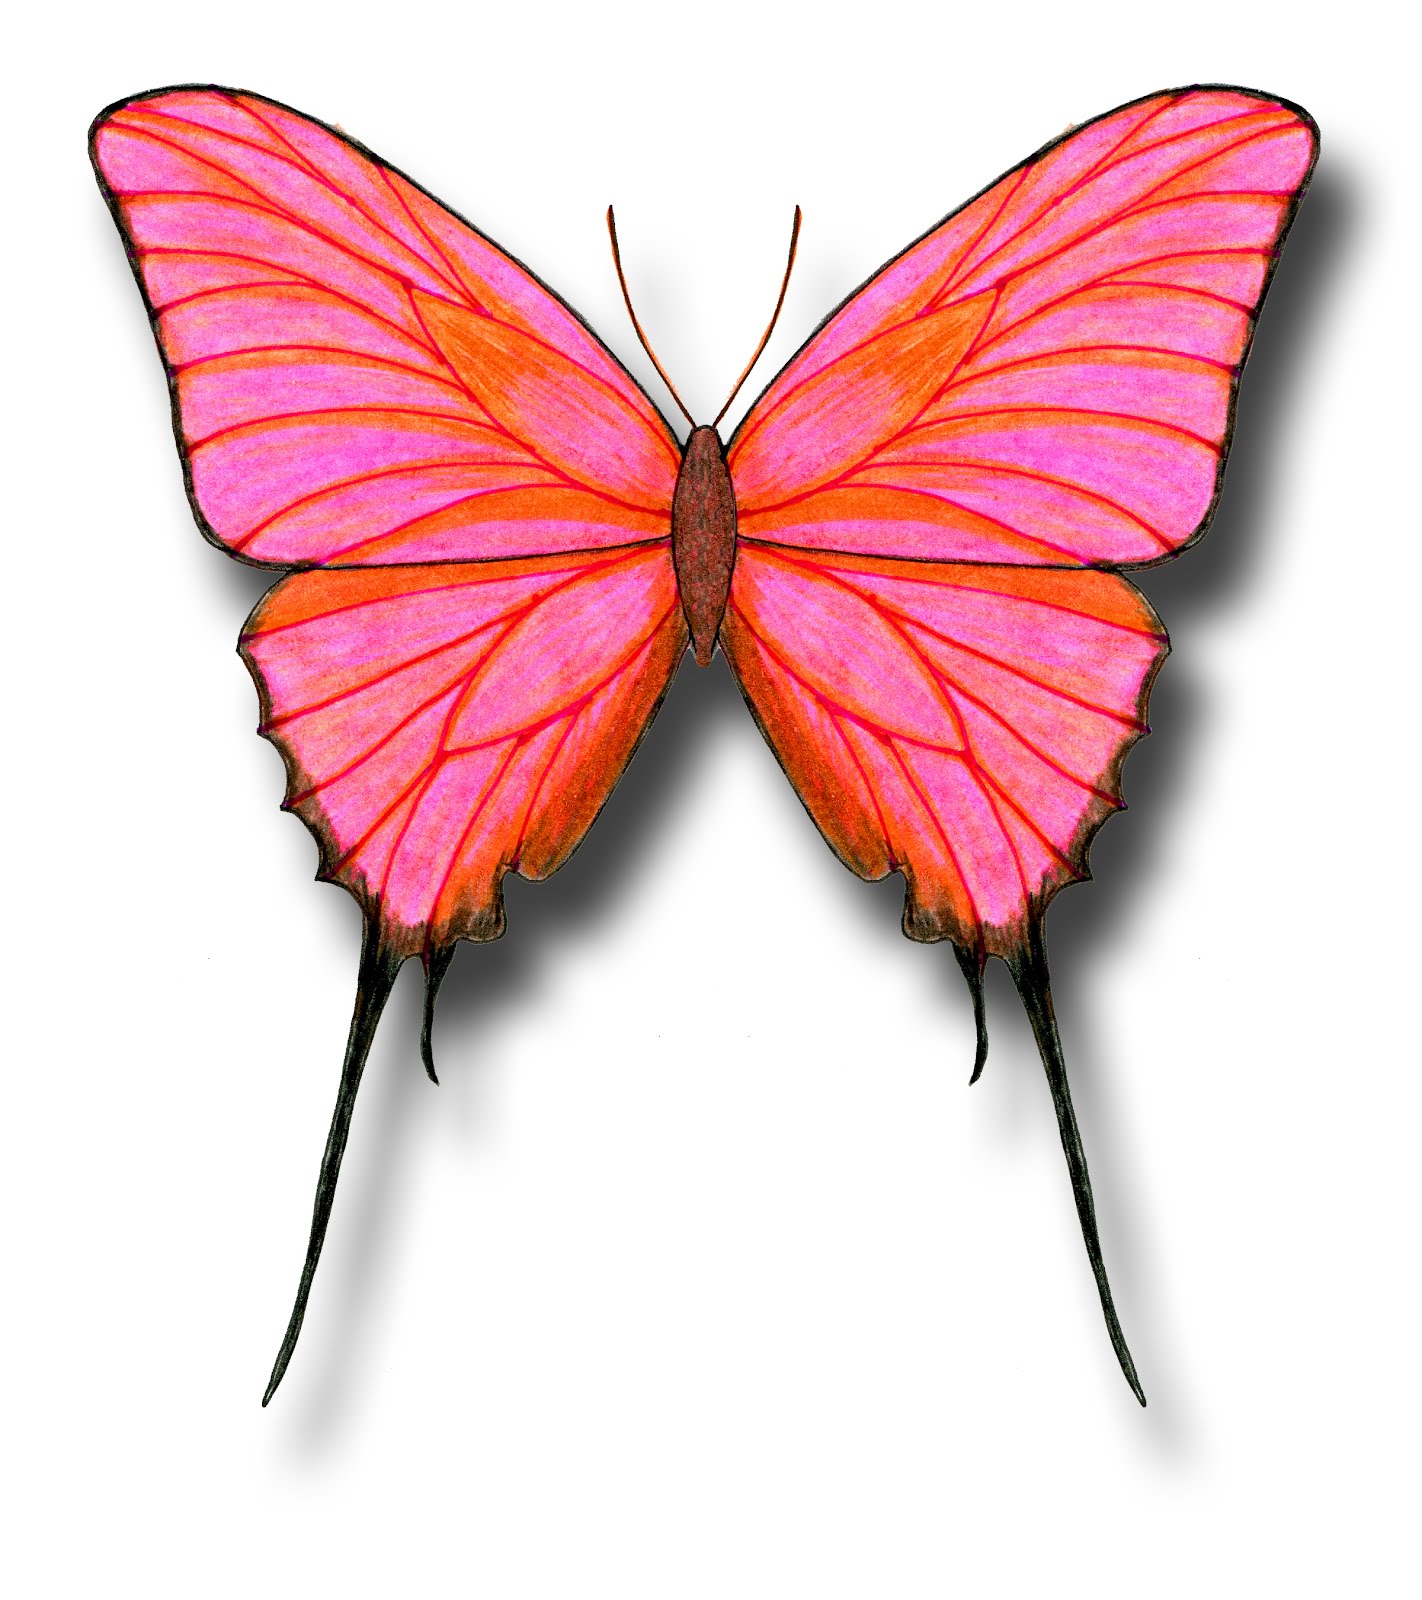 Aileen Biser's Blog: Butterfly Drawings